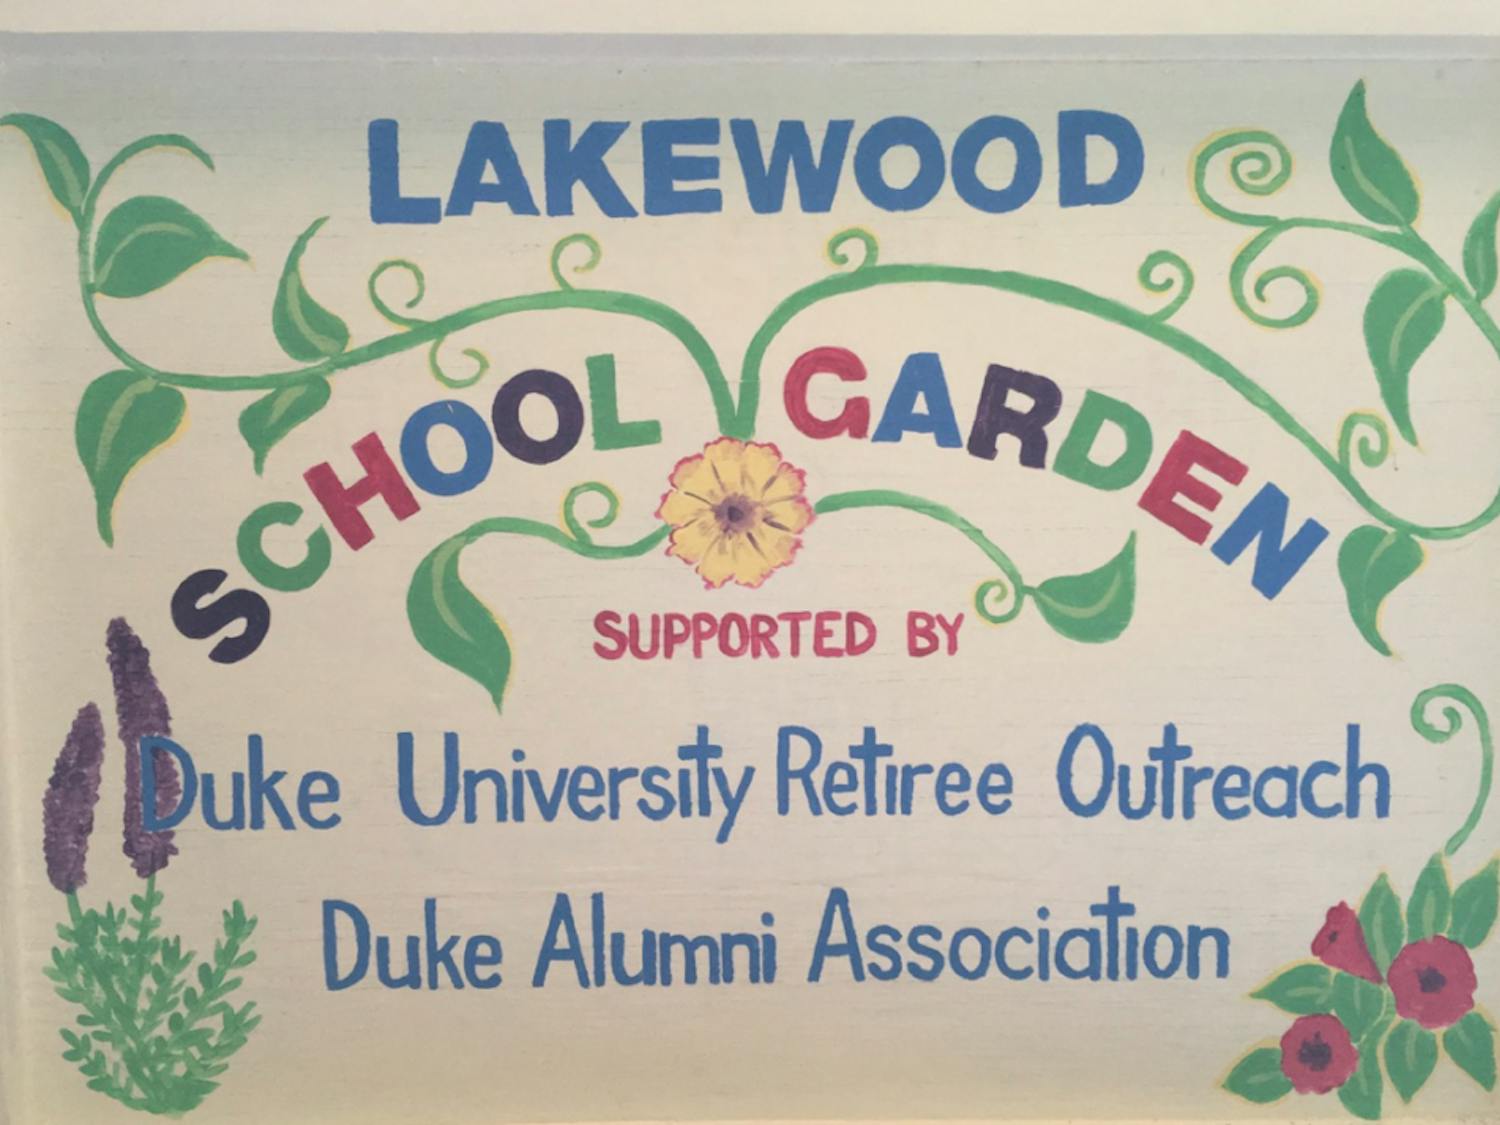 Volunteers from Duke University Retiree Outreach help manage the school garden at&nbsp;Lakewood Elementary, a Title I school in Durham.